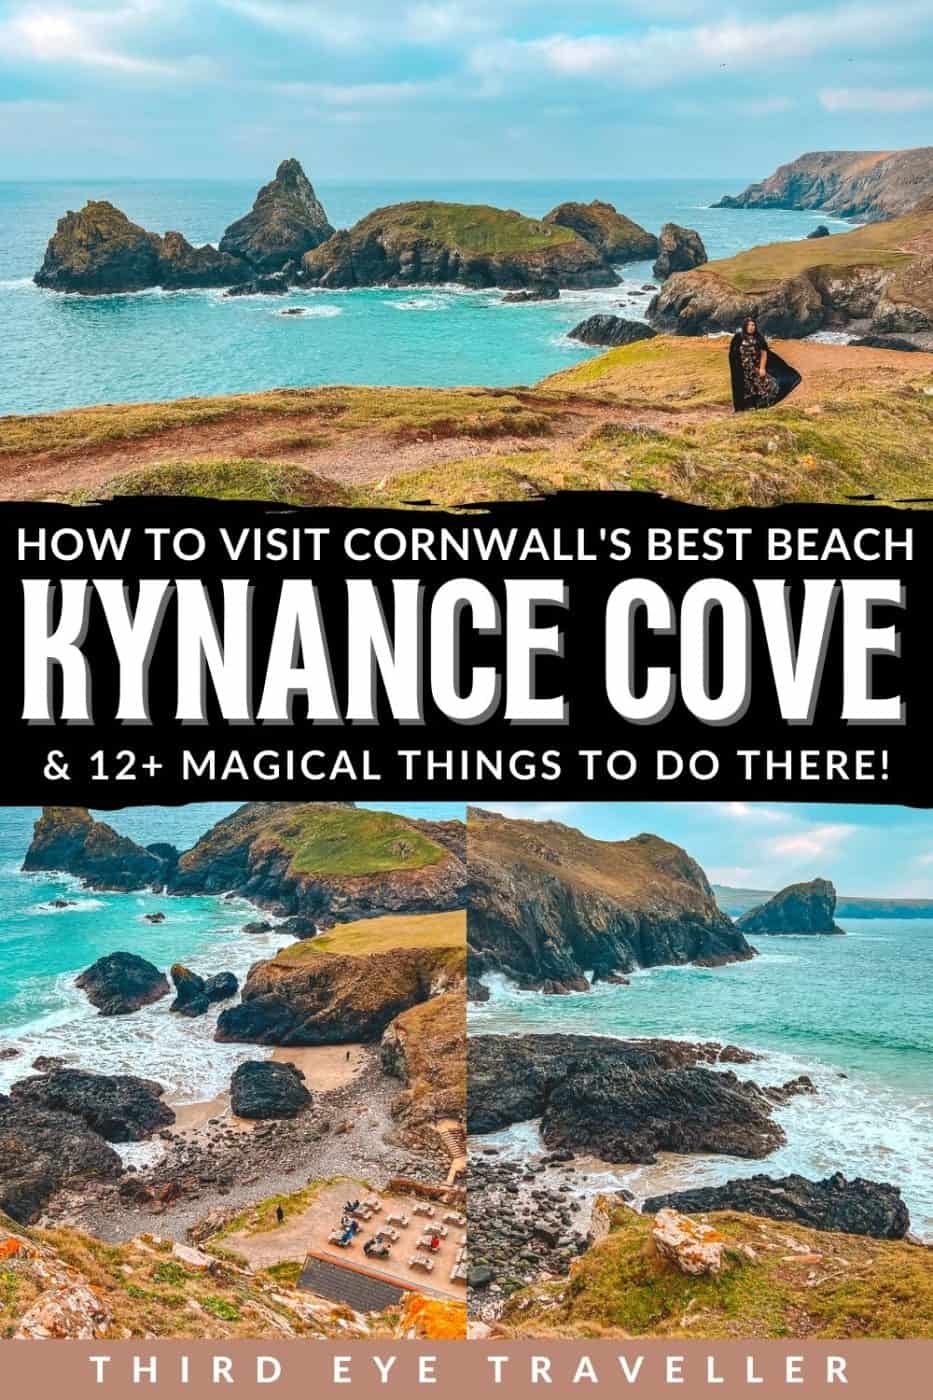 Things to do Kynance Cove How to visit 